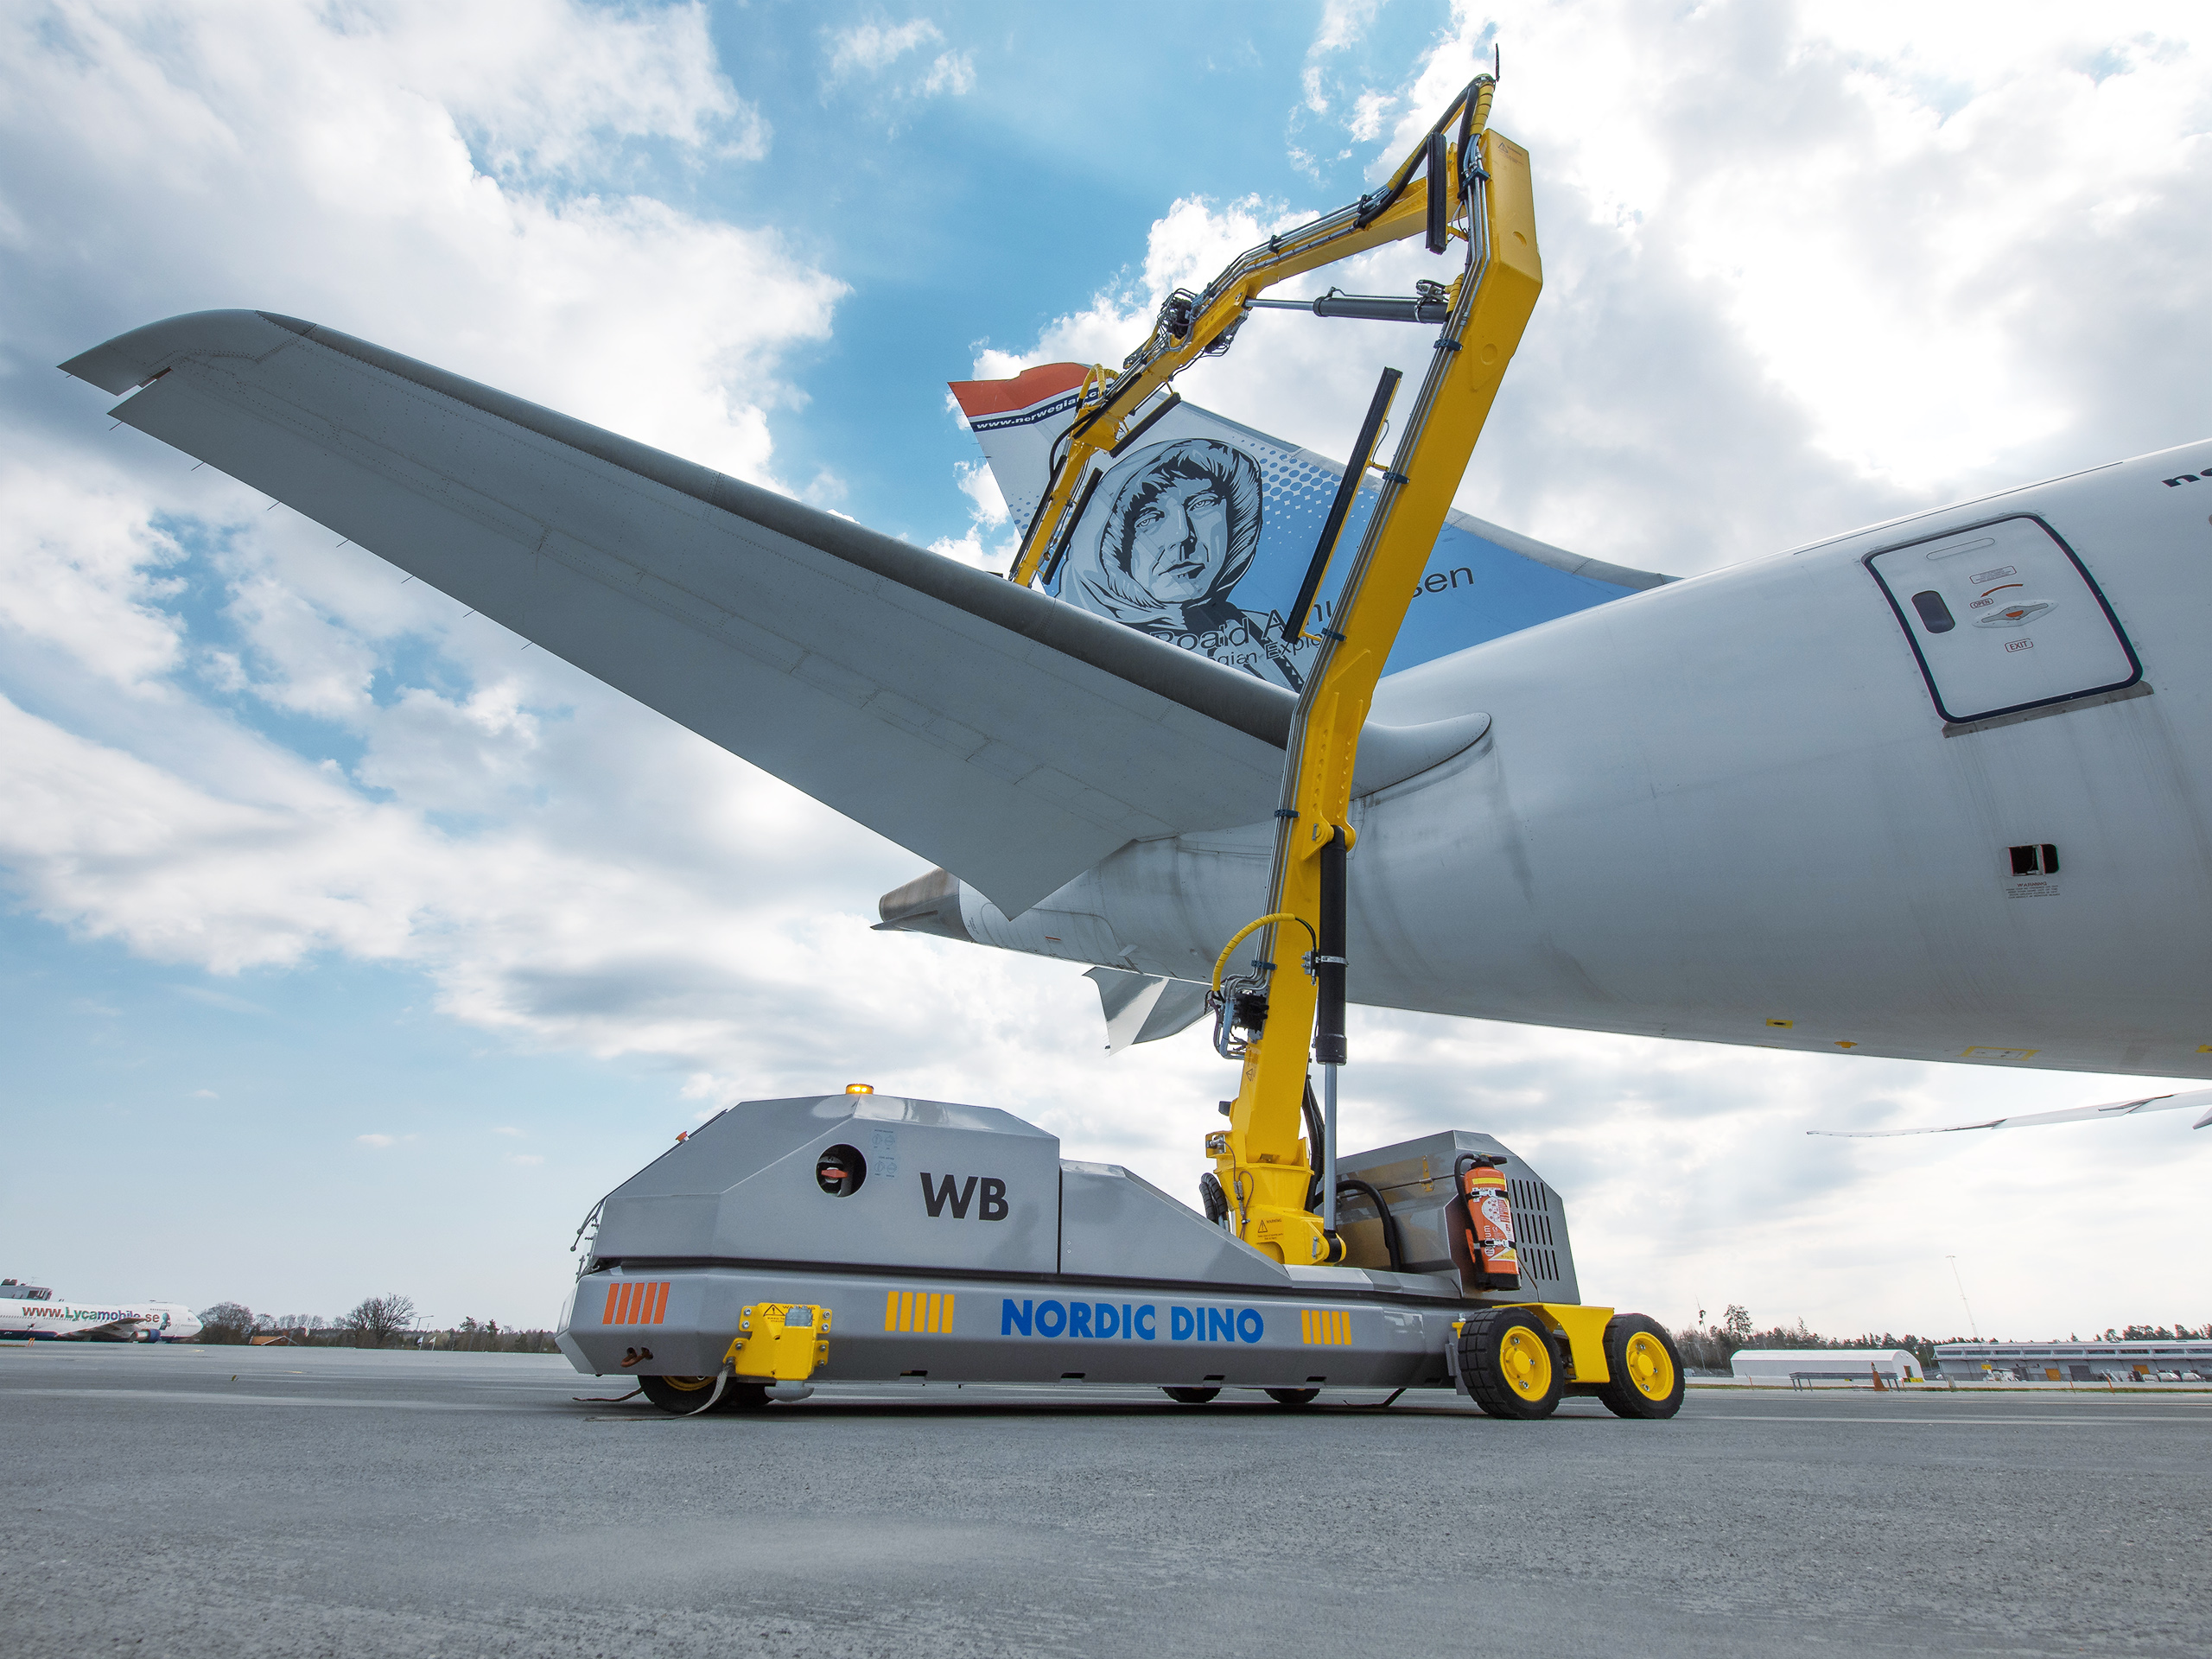 The past, present and future of aircraft cleaning